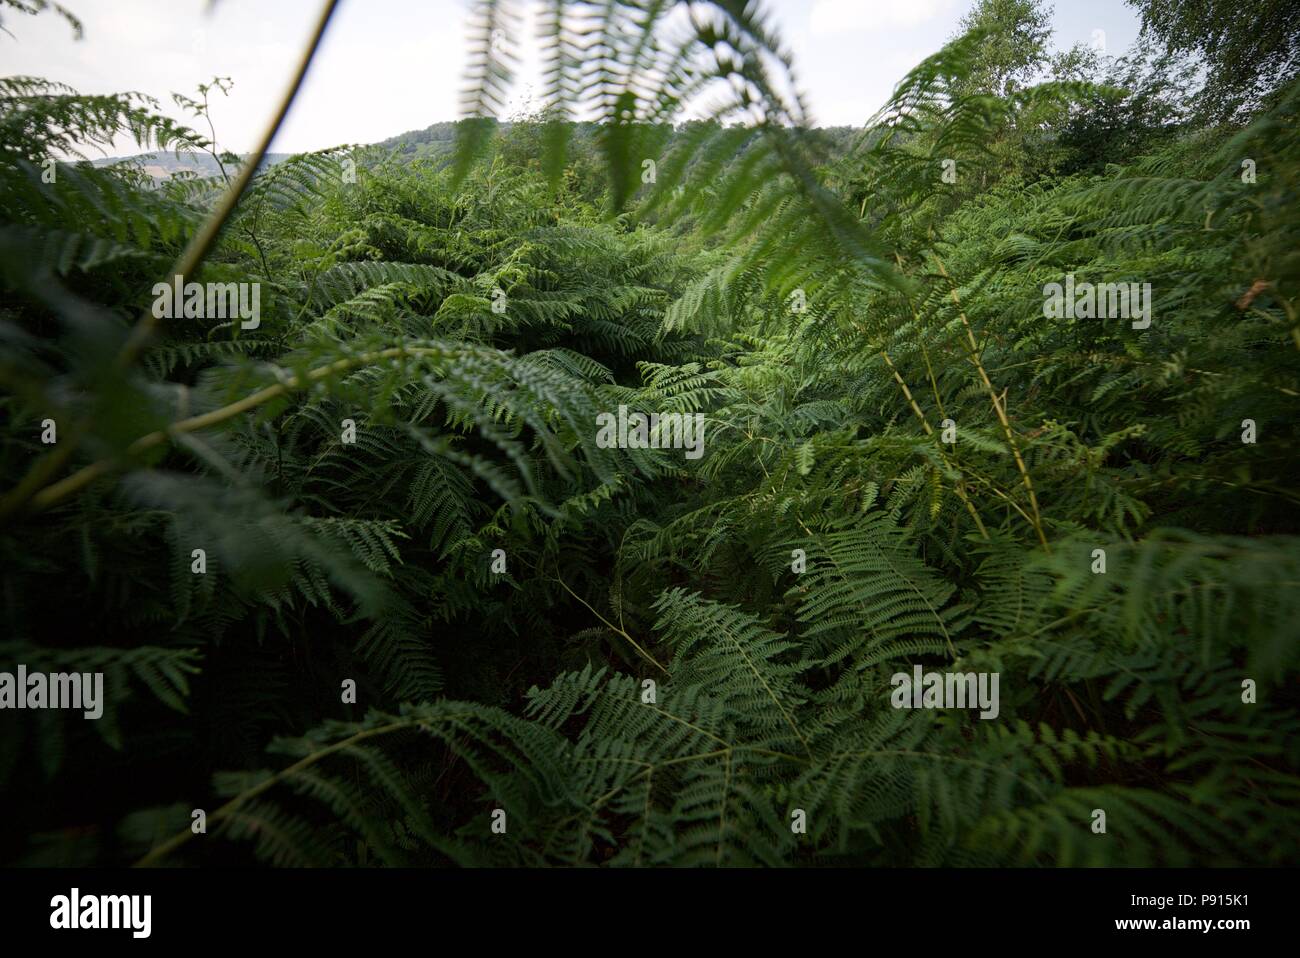 Overgrown fern plants growing in a jungle like space (walking through overgrown ferns, also known as bracken) Stock Photo